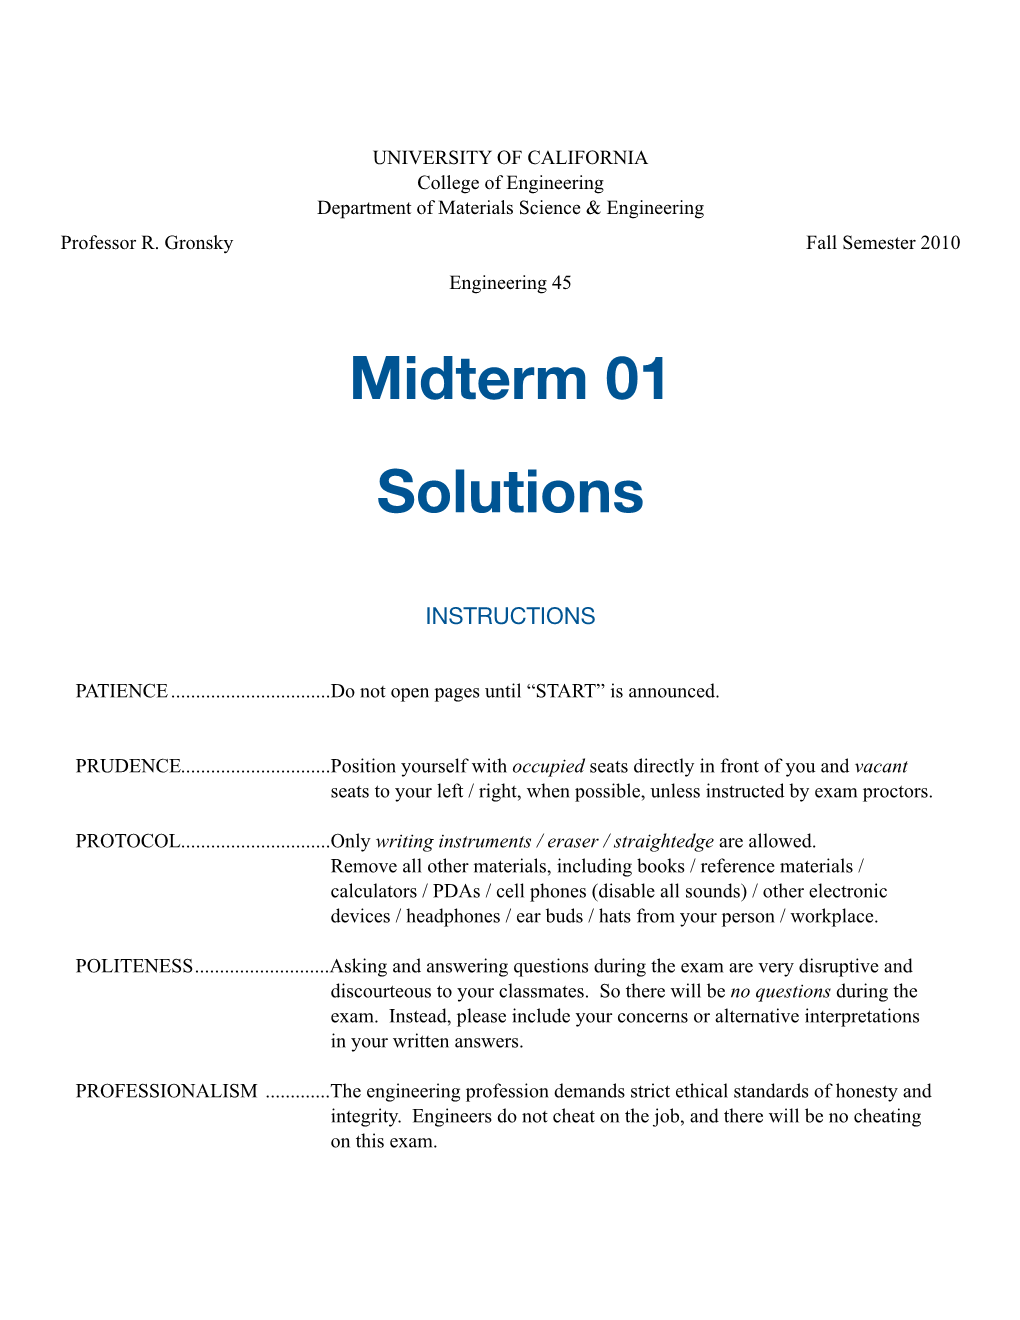 Midterm 01 Solutions